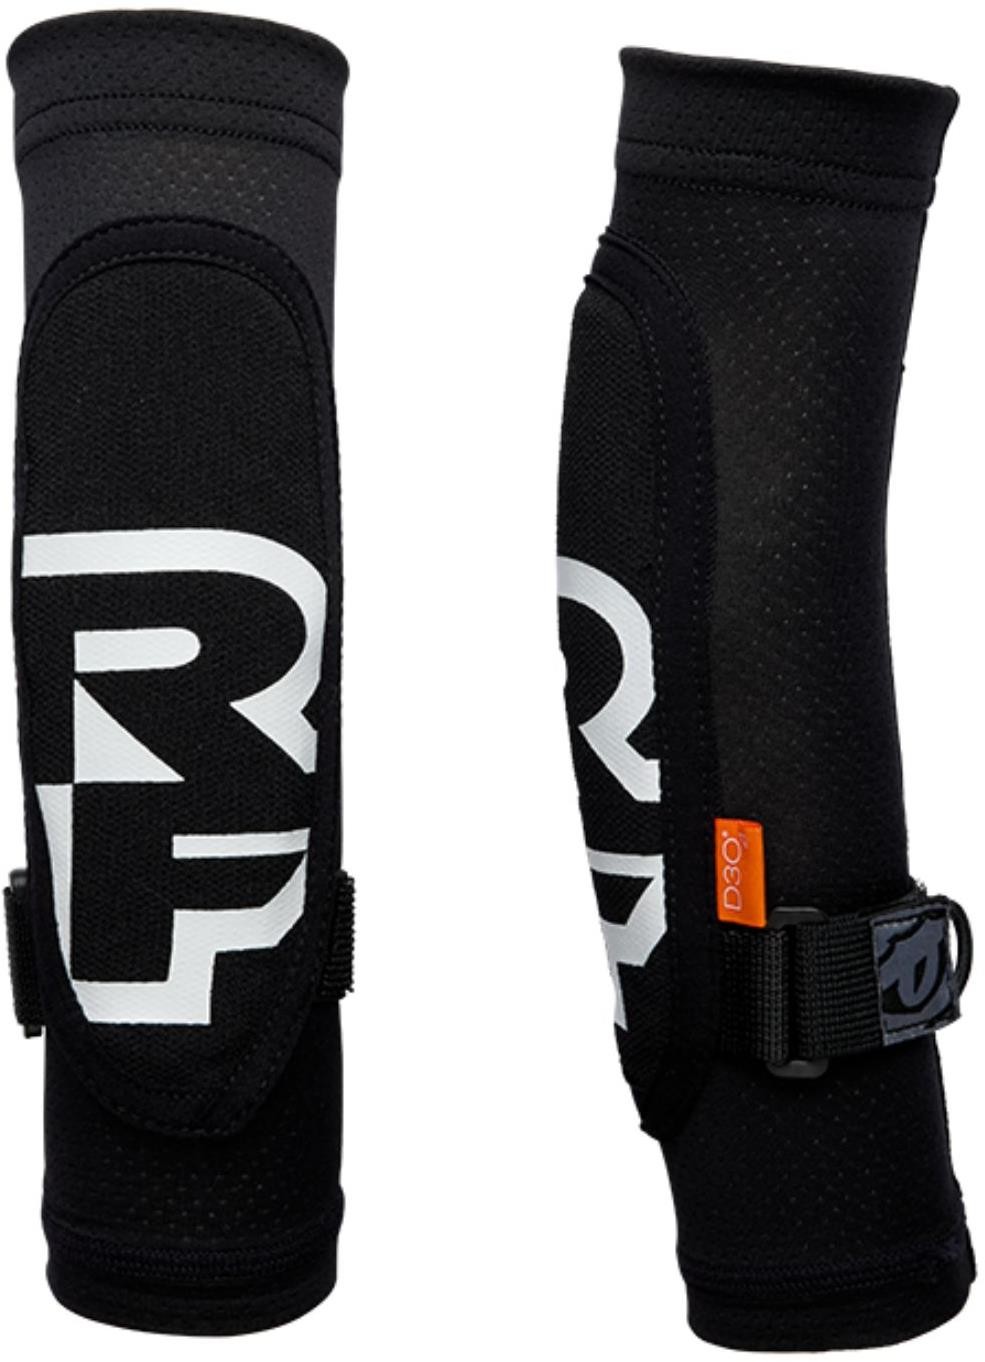 Sendy Youth Elbow Guards image 0